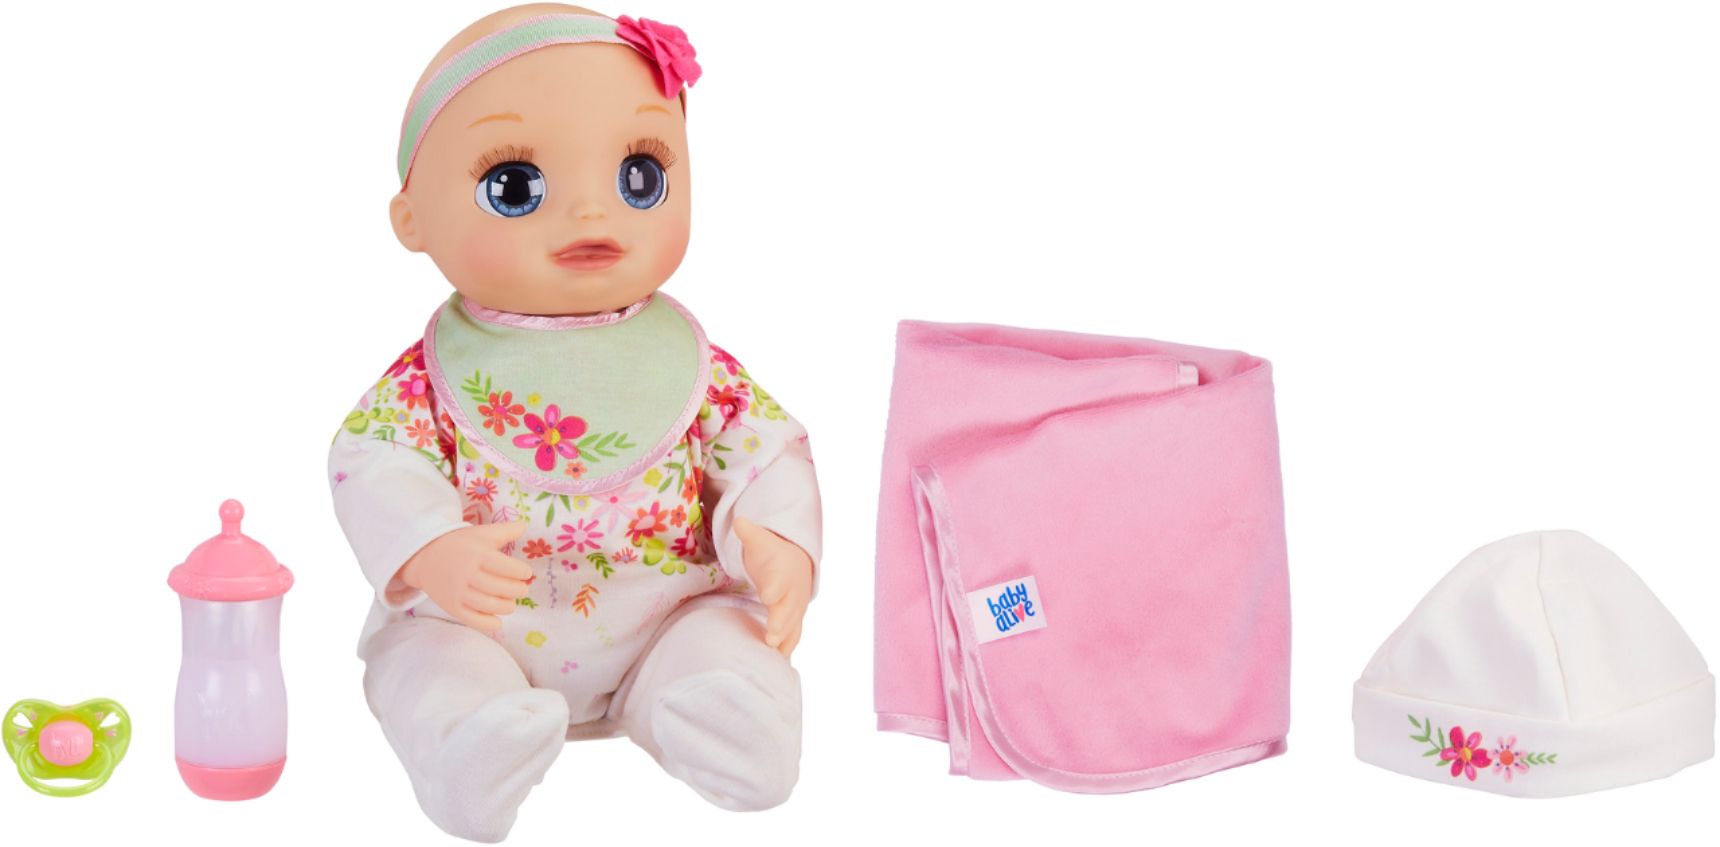 Questions and Answers: Baby Alive Real As Can Be Baby Doll E2352 - Best Buy